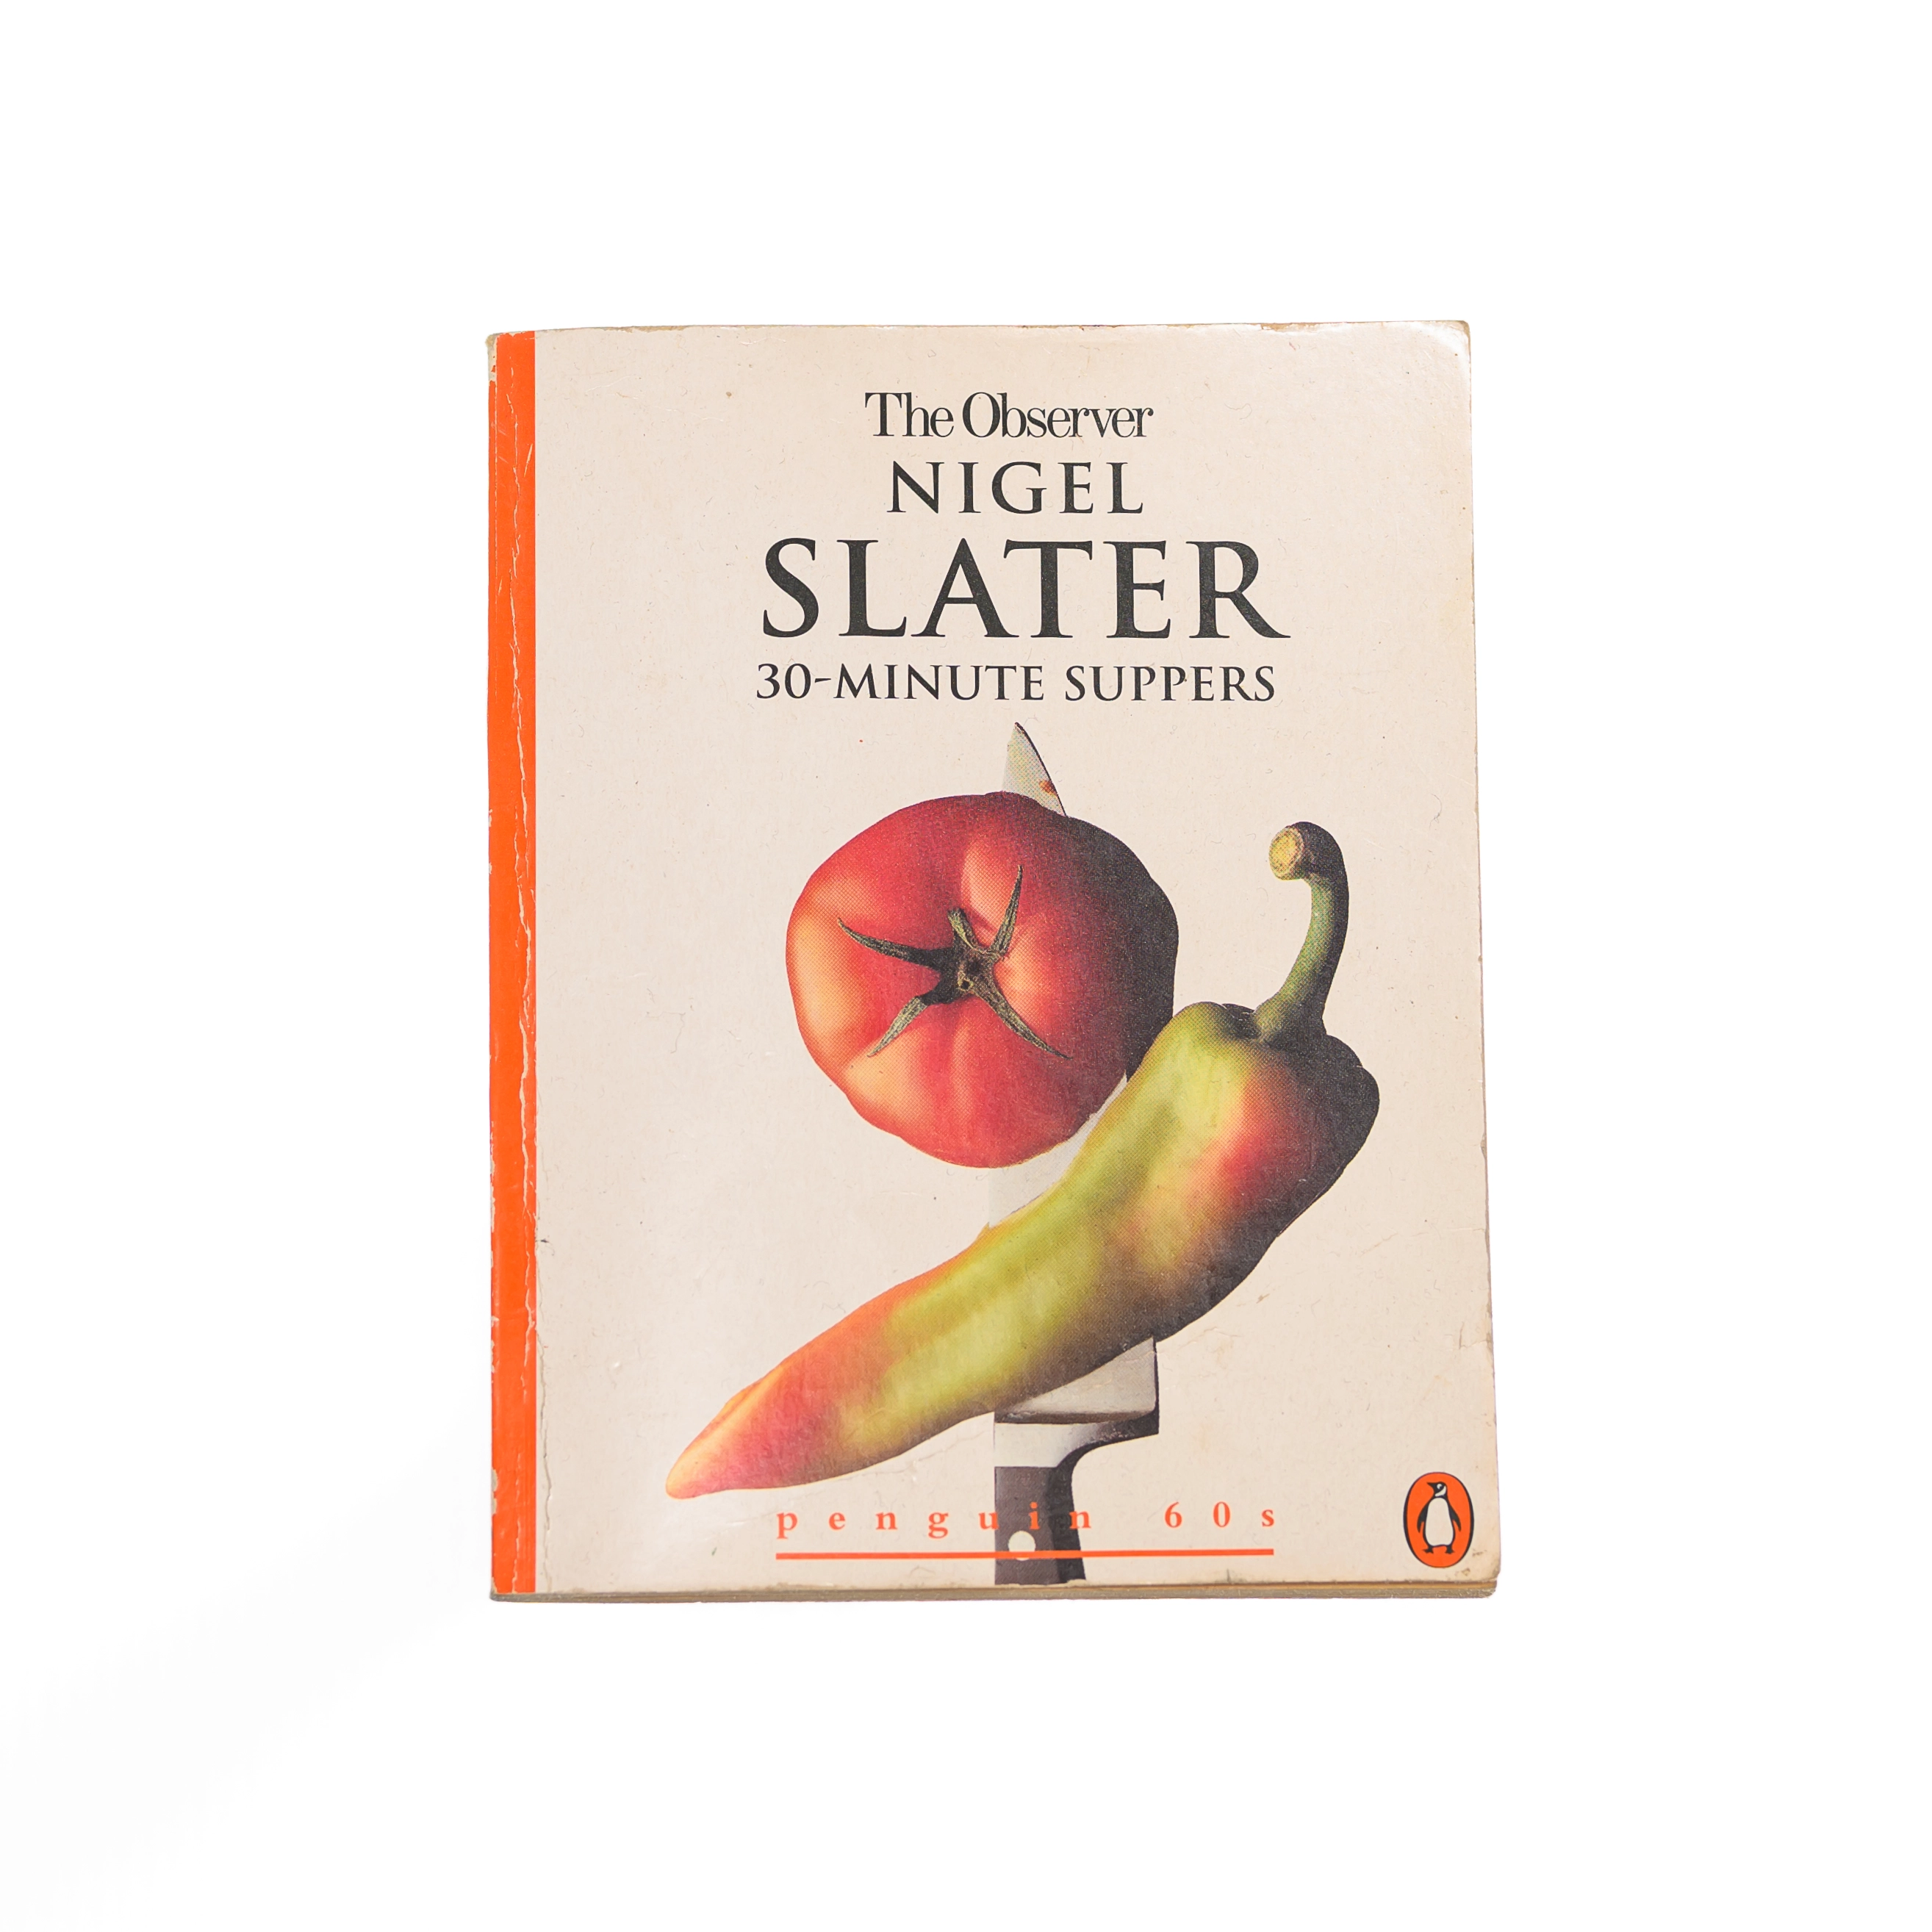 Book Photography for Nigel Slater